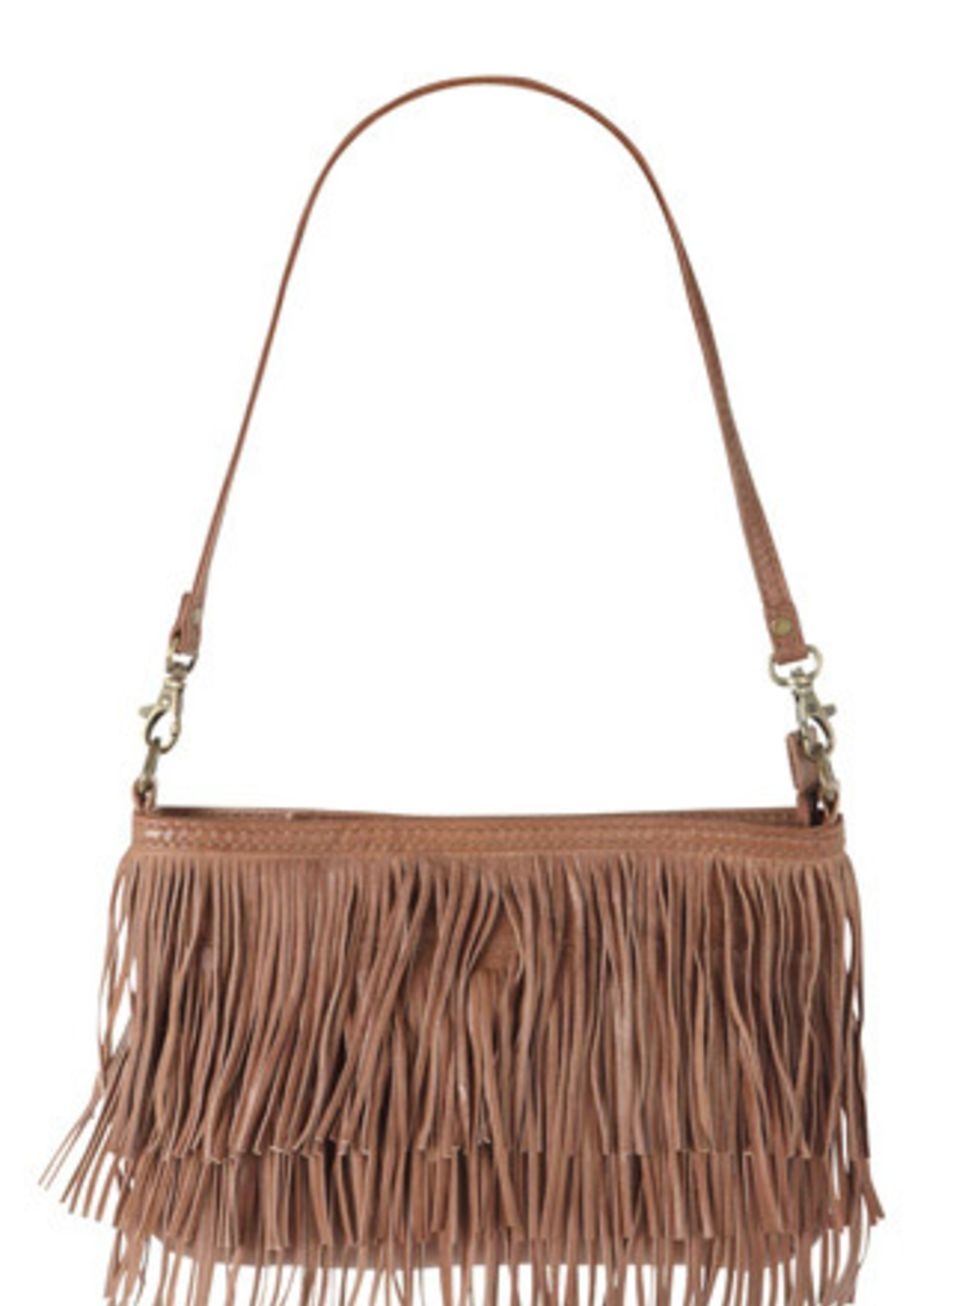 <p>If youre thinking about attempting the double denim look, make sure you pair those blue hues with this Americana-style tassel bag from Oasis. It will come in handy paired with floral tea dresses and wellies at all those festivals this summer too.</p><